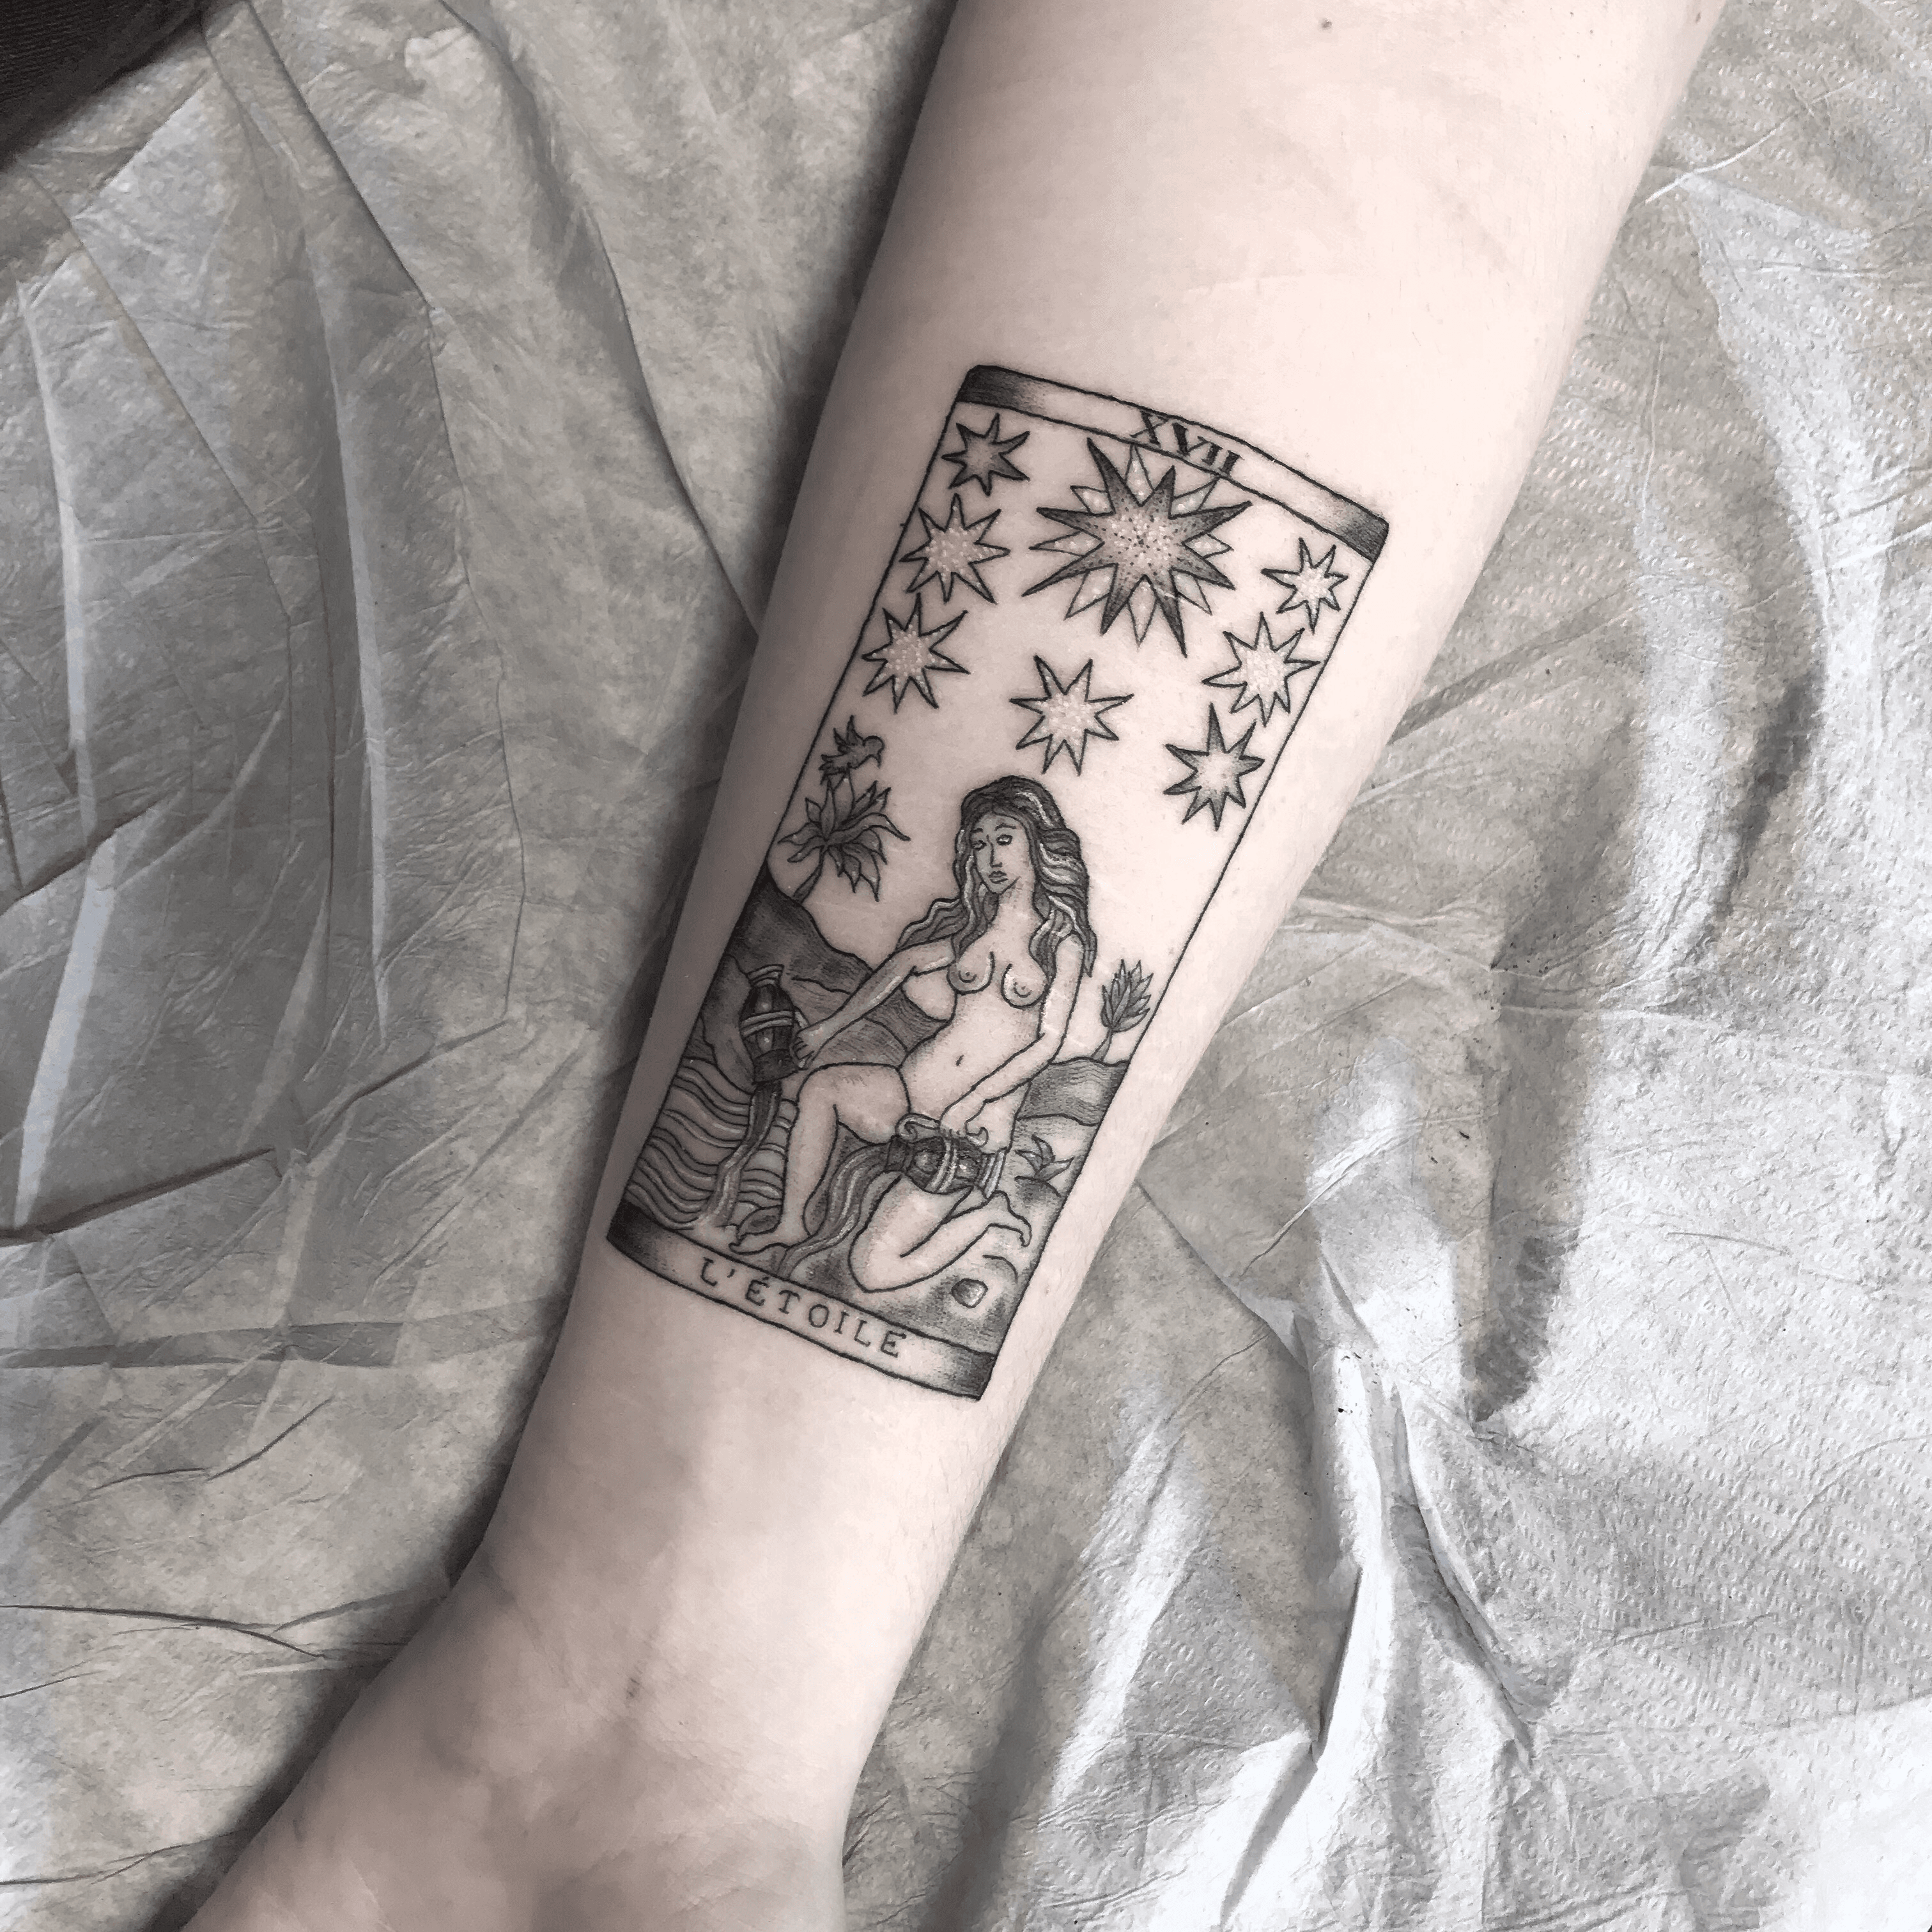 The Strength Tarot Card done by Cello  Sacred Skin West Allis WI  r tattoos